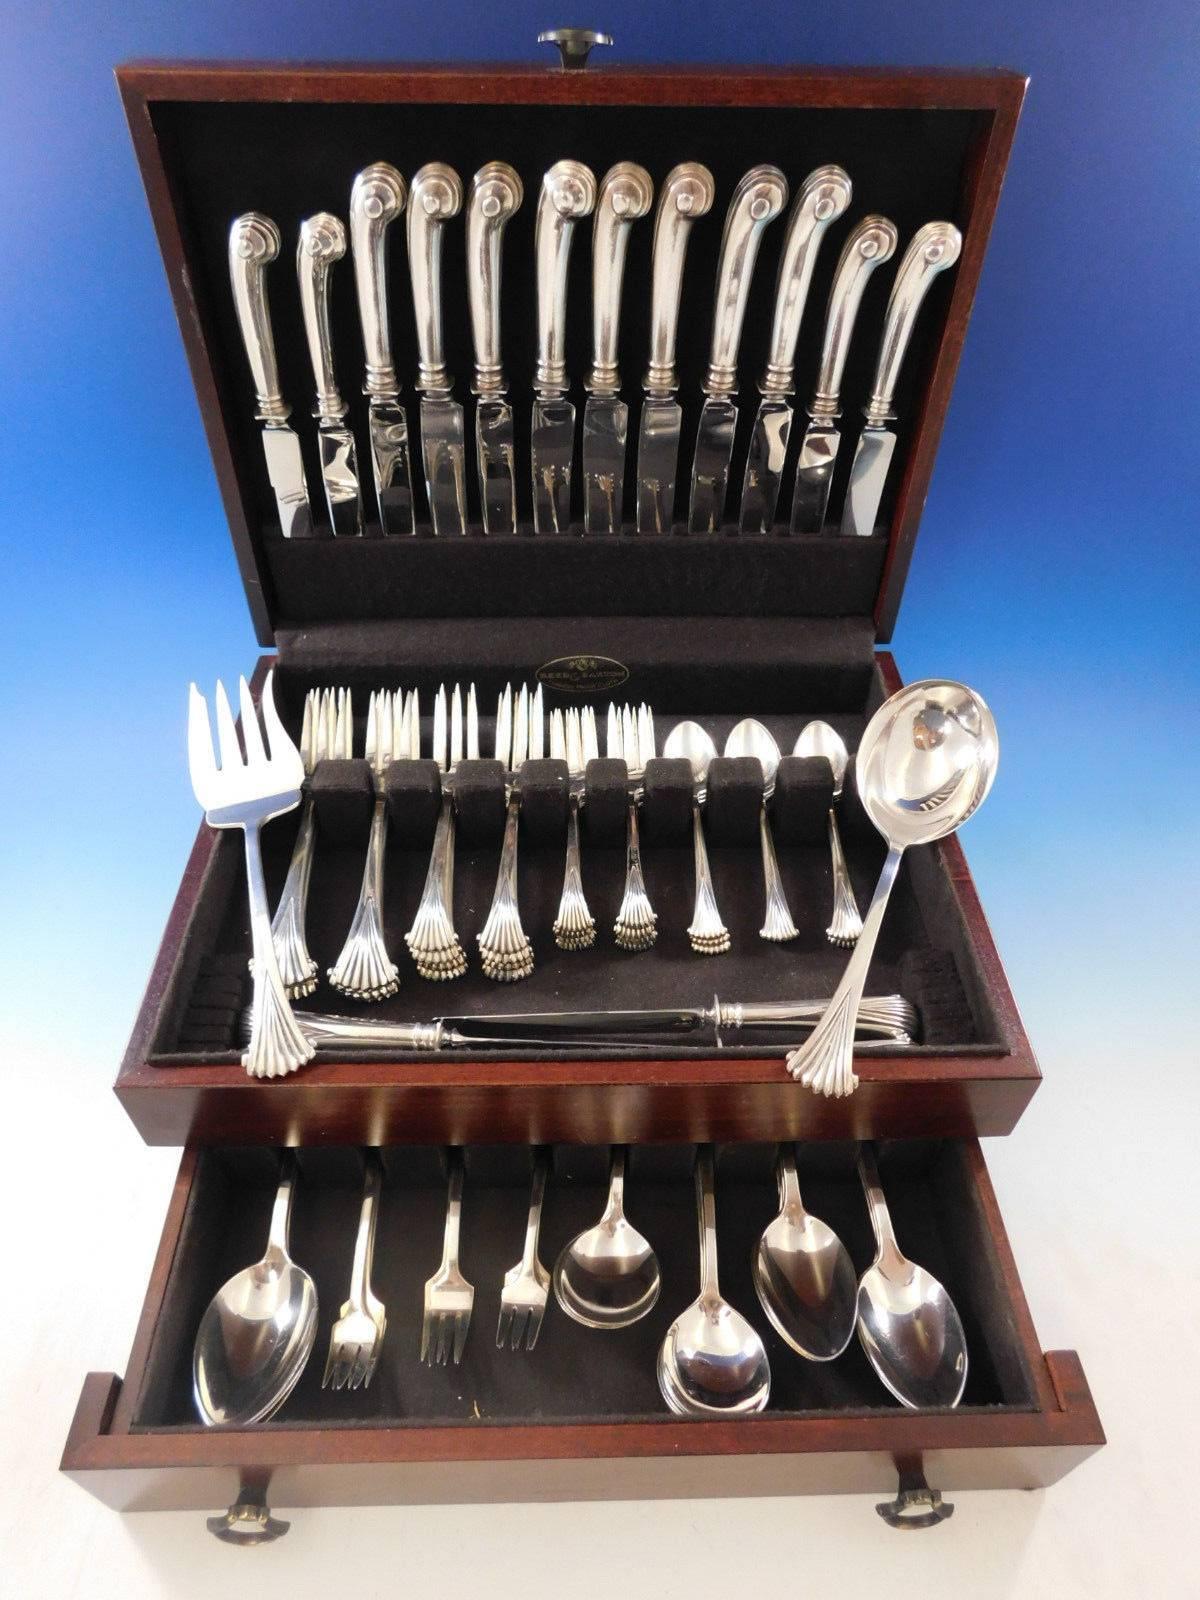 Fabulous HUGE OLD ONSLOW by TUTTLE sterling silver flatware set, 77 pieces. This pattern is heavy with wonderful pistol-grip handles on the knives. This set includes:

8 Dinner size Knives, 9 1/2